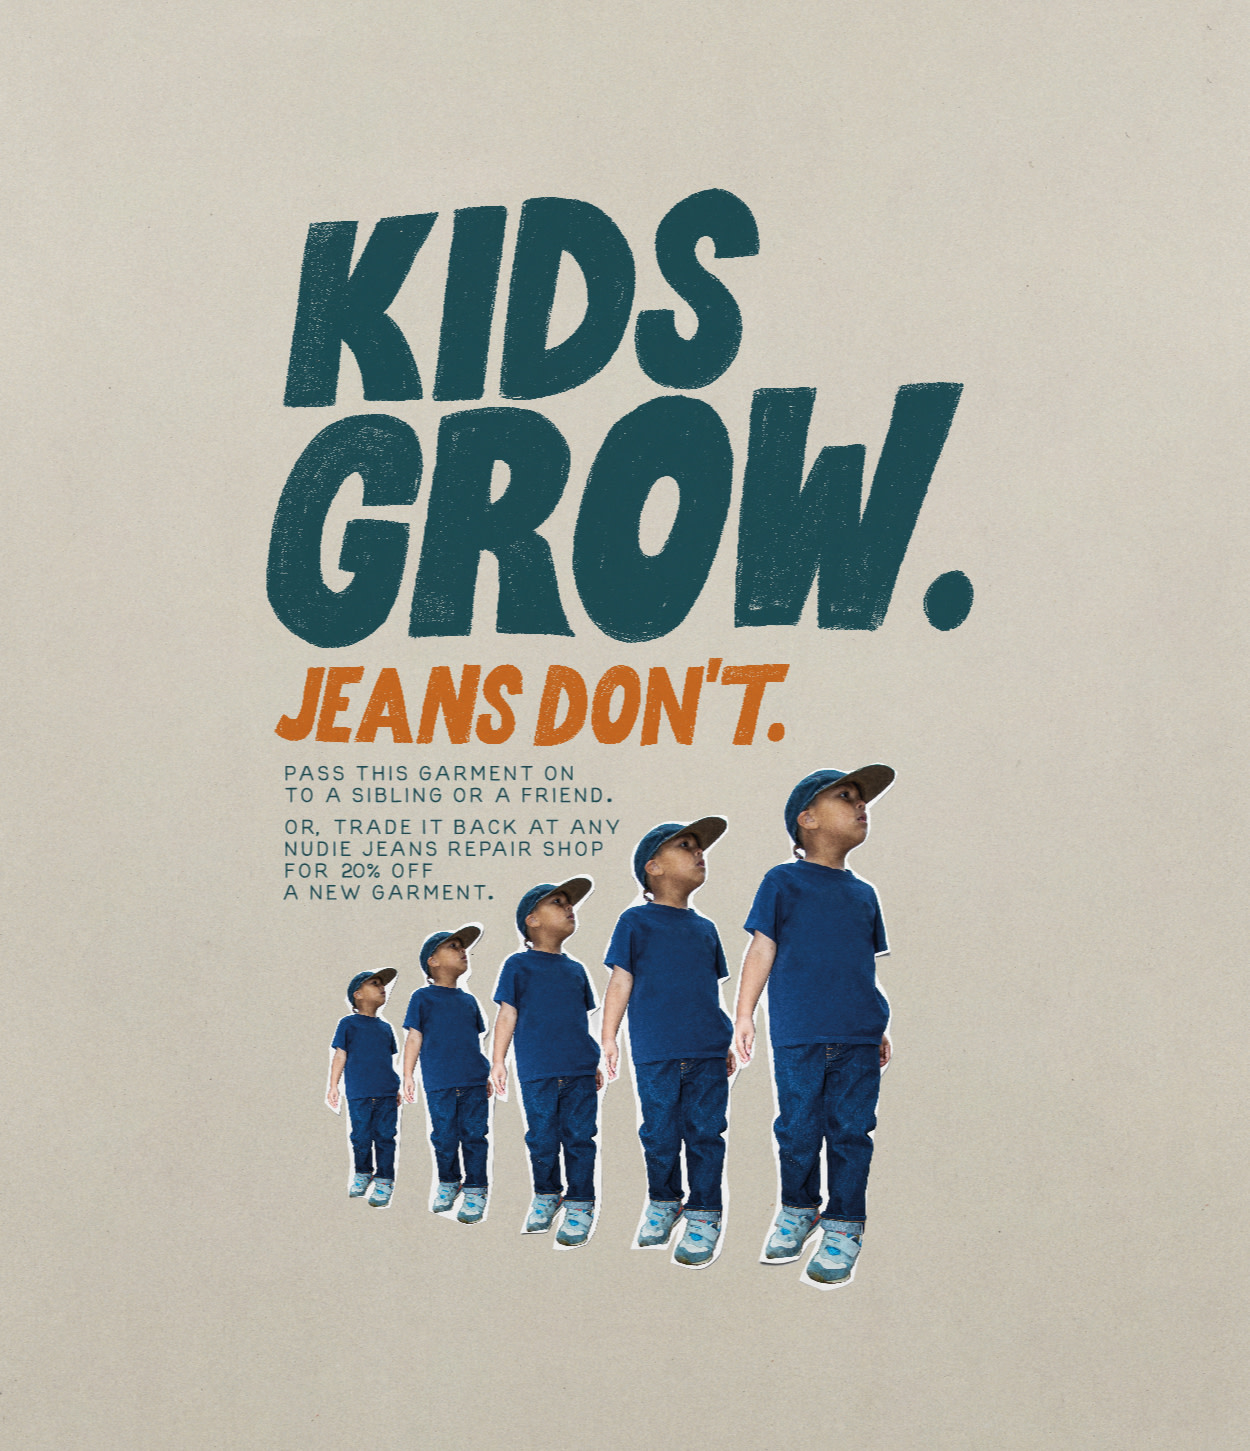 Kids Grow Jeans Don't